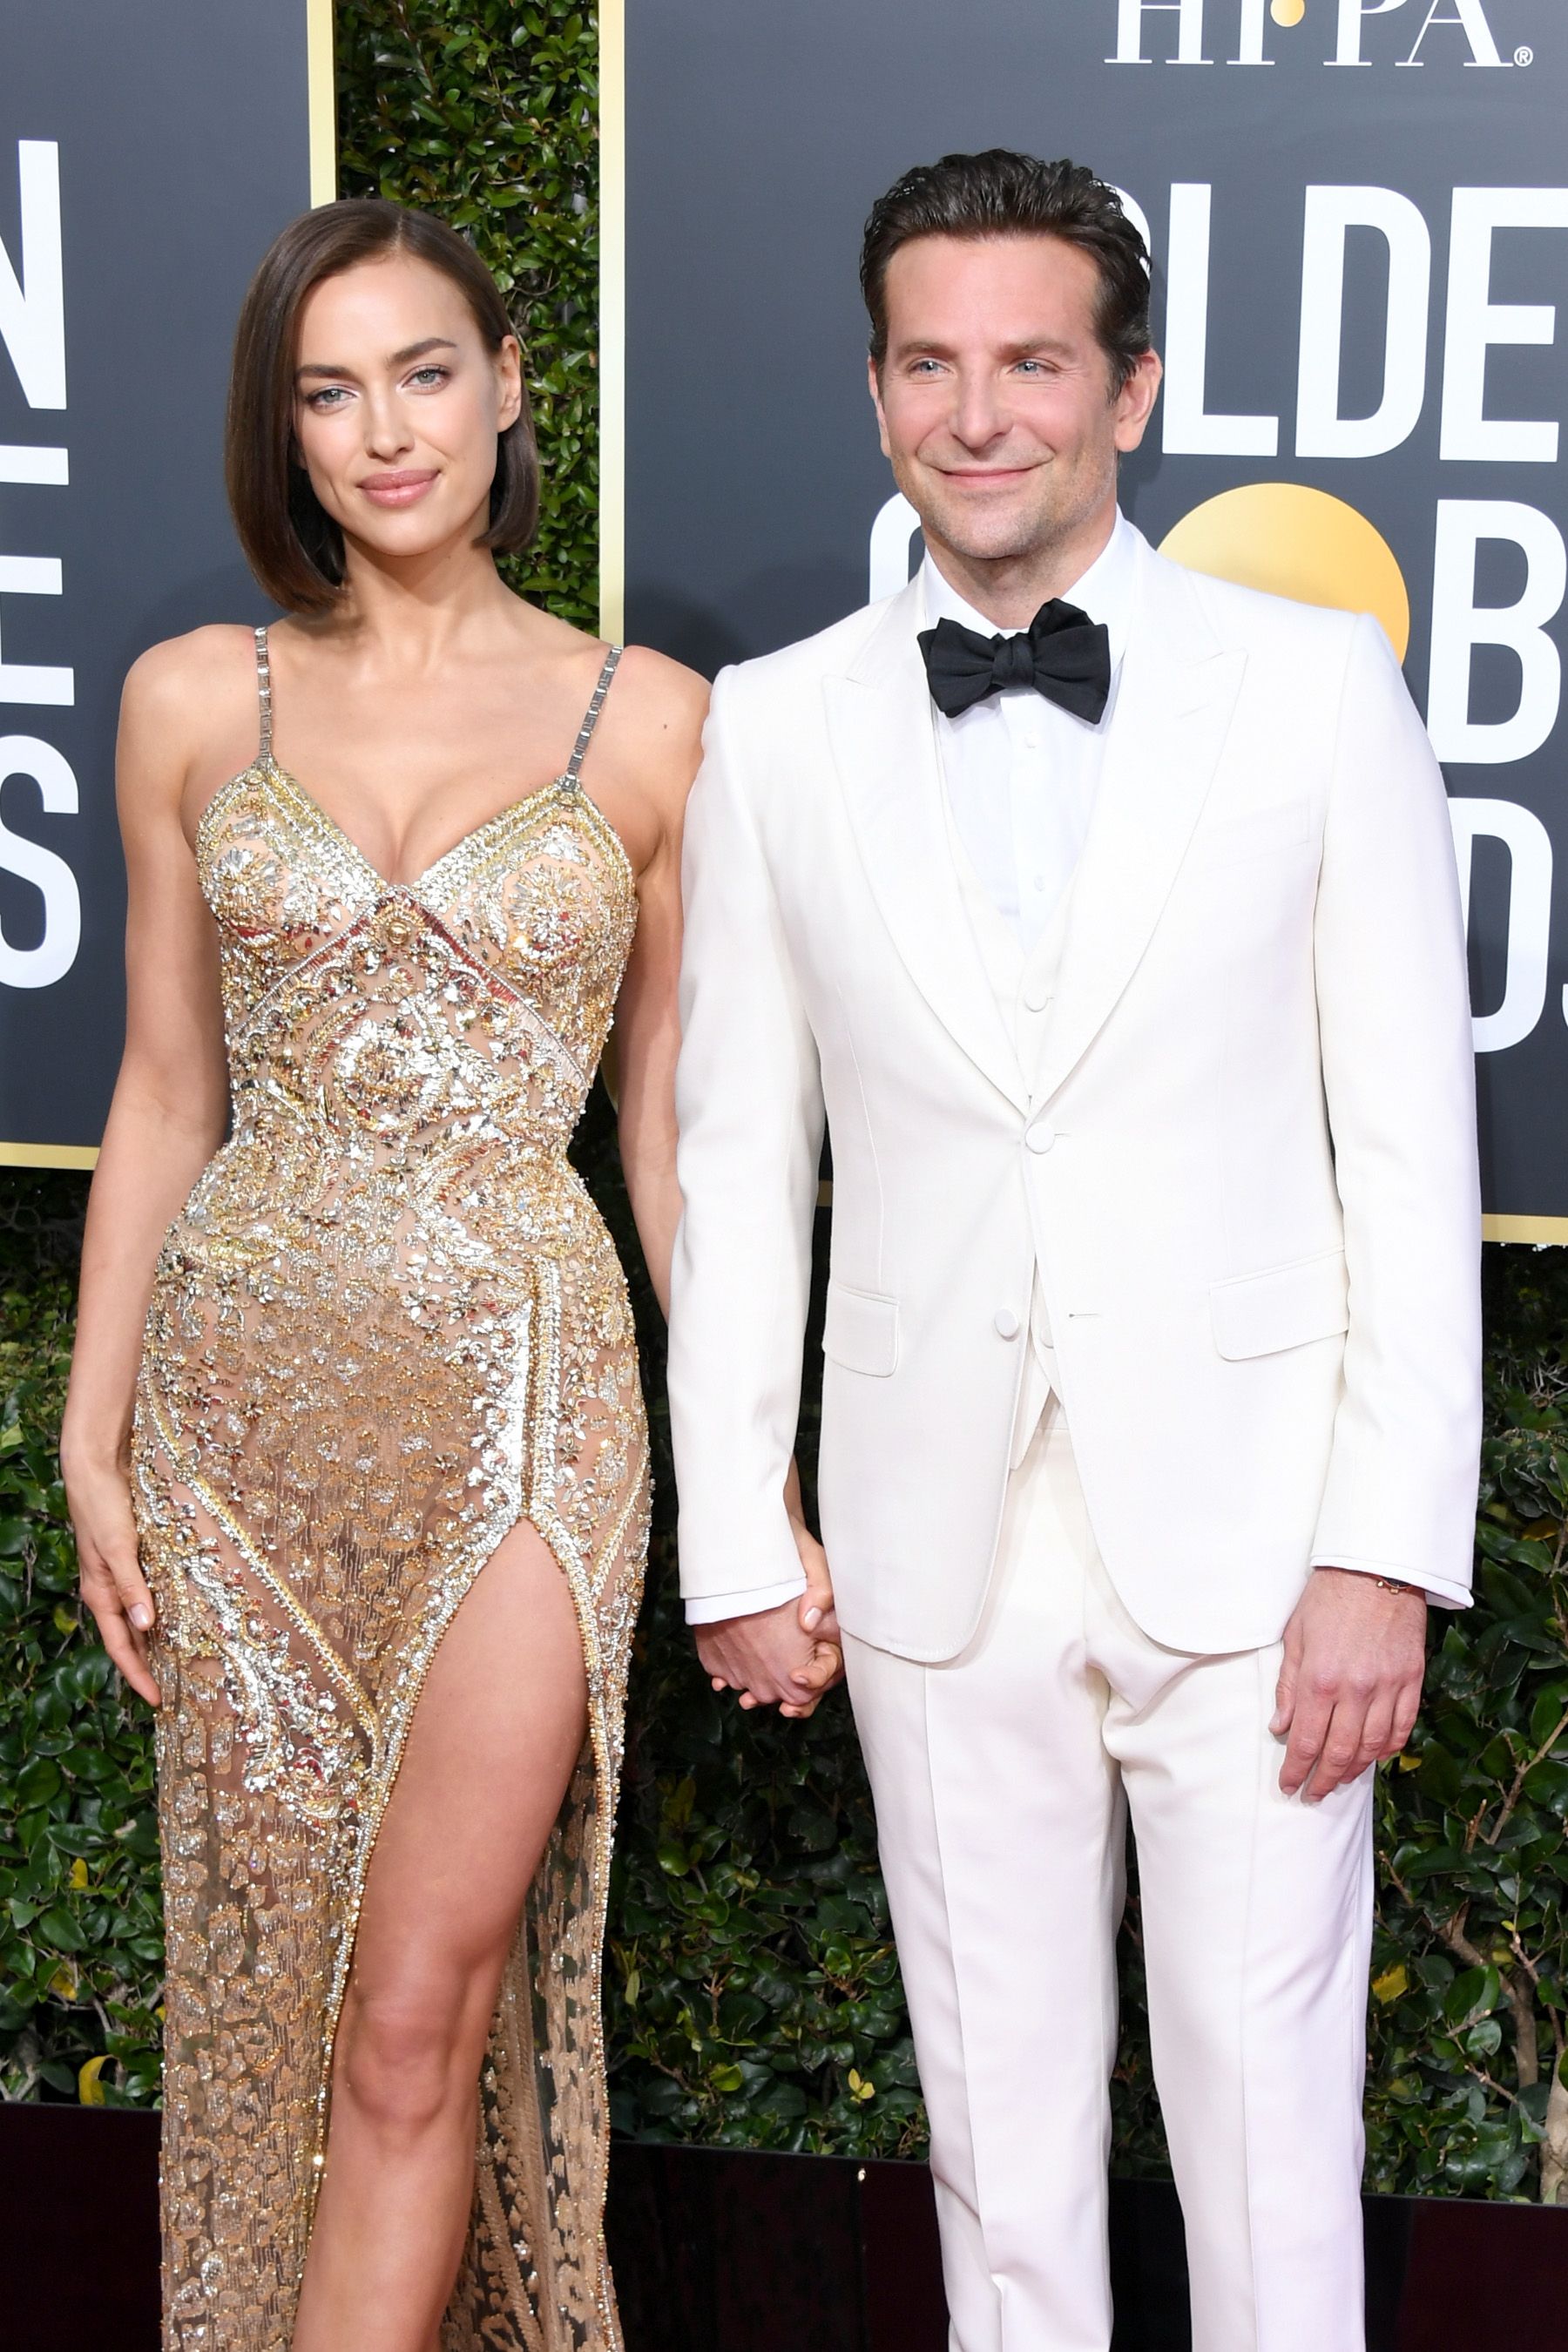 Irina Shayk and Bradley Cooper attend the 76th Annual Golden Globe Awards on January 6, 2019, in Beverly Hills, California. | Source: Getty Images